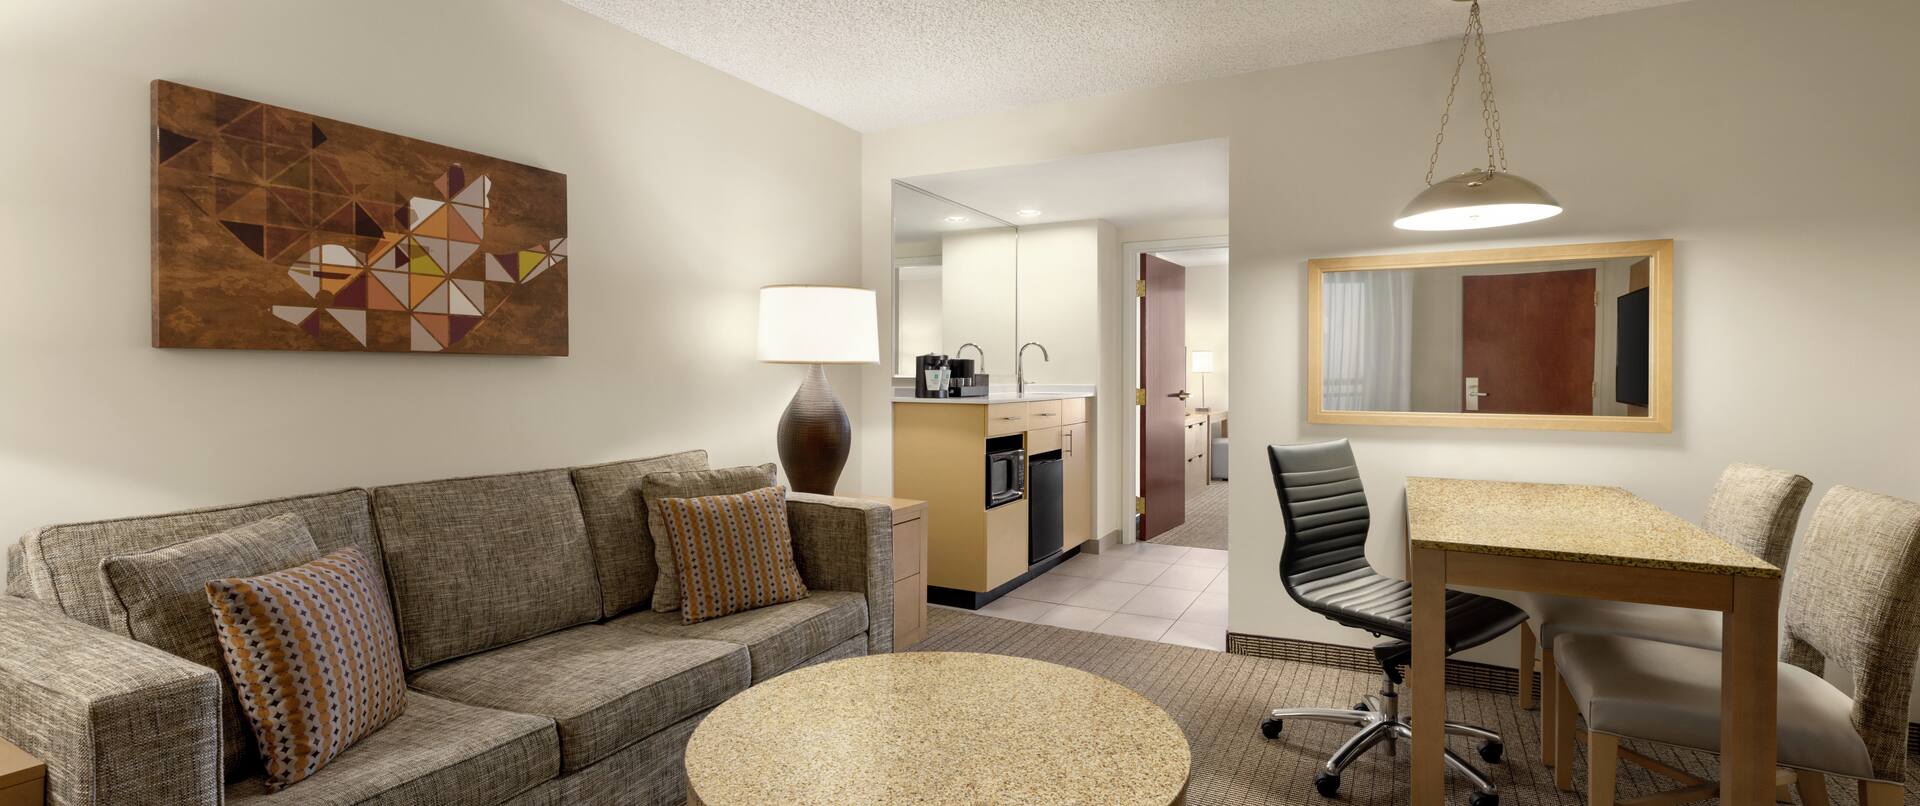 Spacious living area in suite featuring comfortable sofa, dining table, wet bar, and private bedroom.